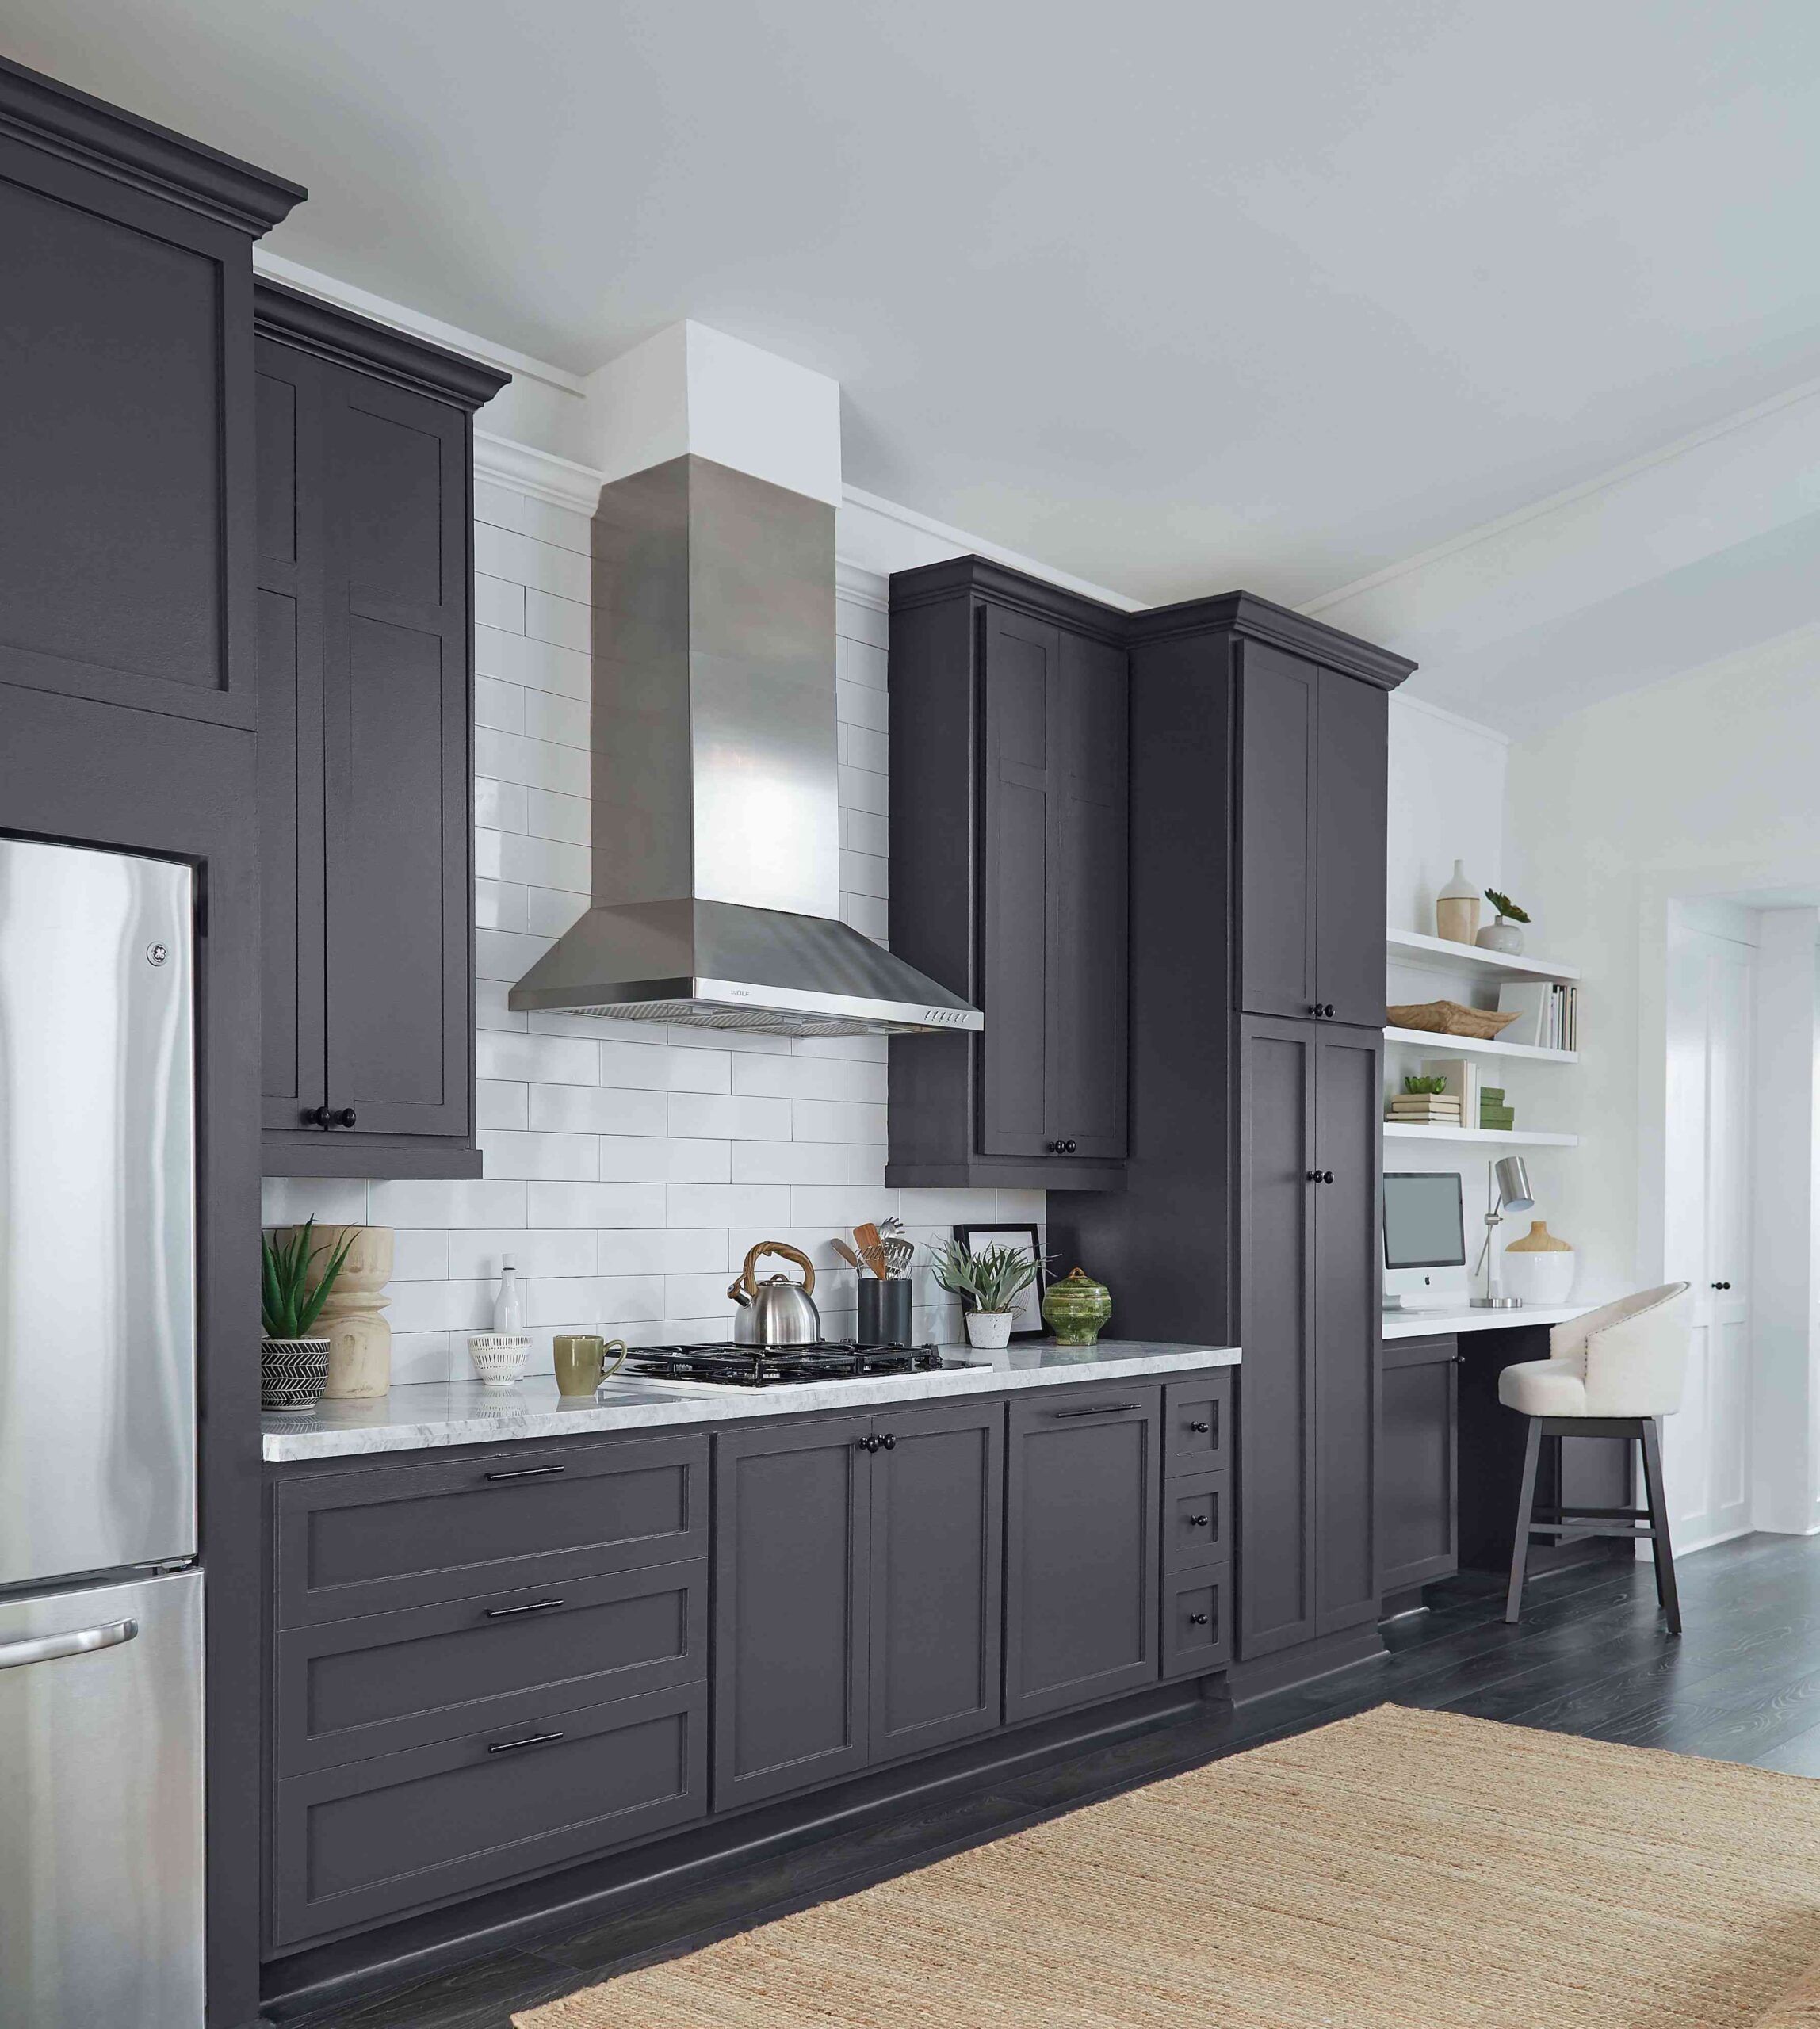 4 Best Kitchen Cabinet Paint Colors, According to Pros - what is the best color for kitchen cabinets?